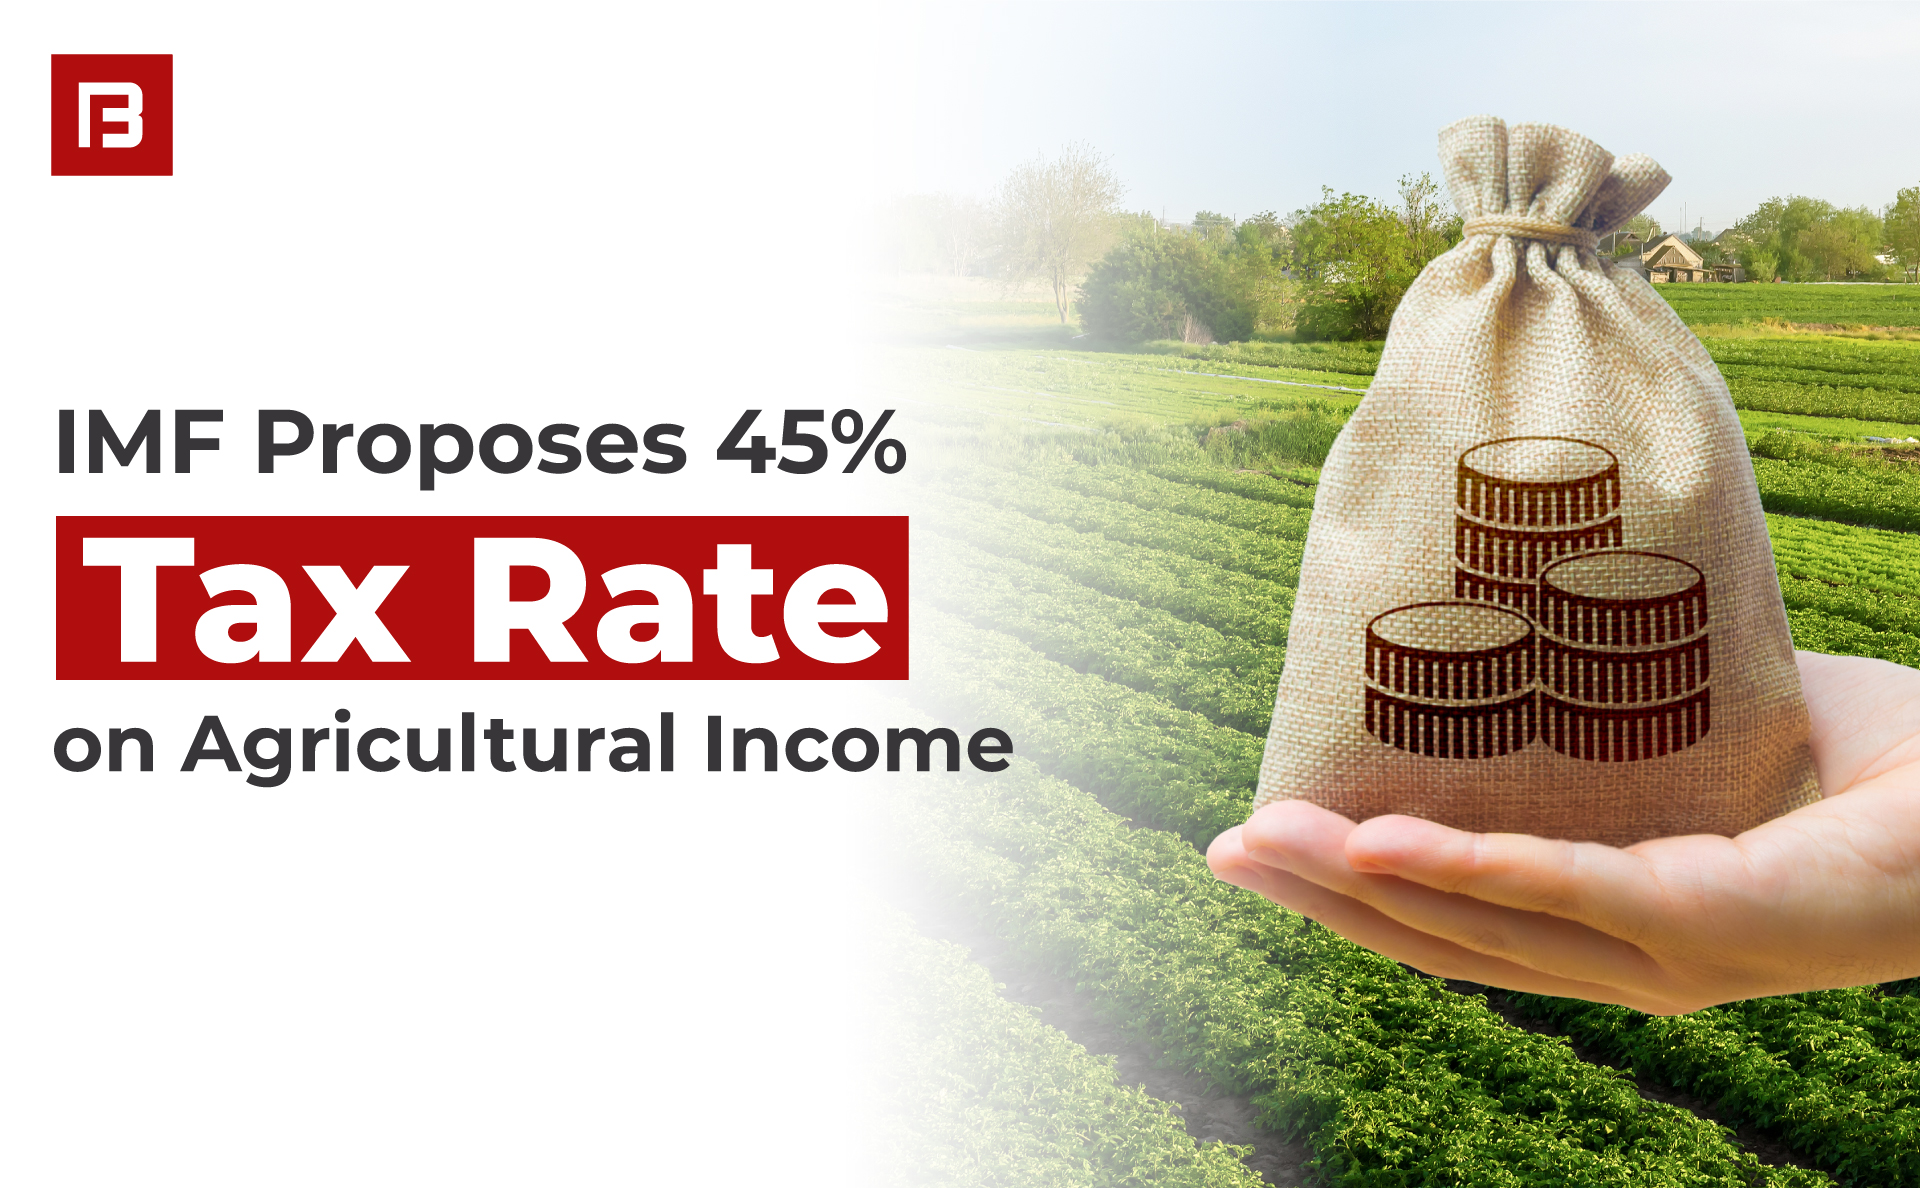 IMF Proposes 45% Tax Rate on Agricultural Income in Pakistan